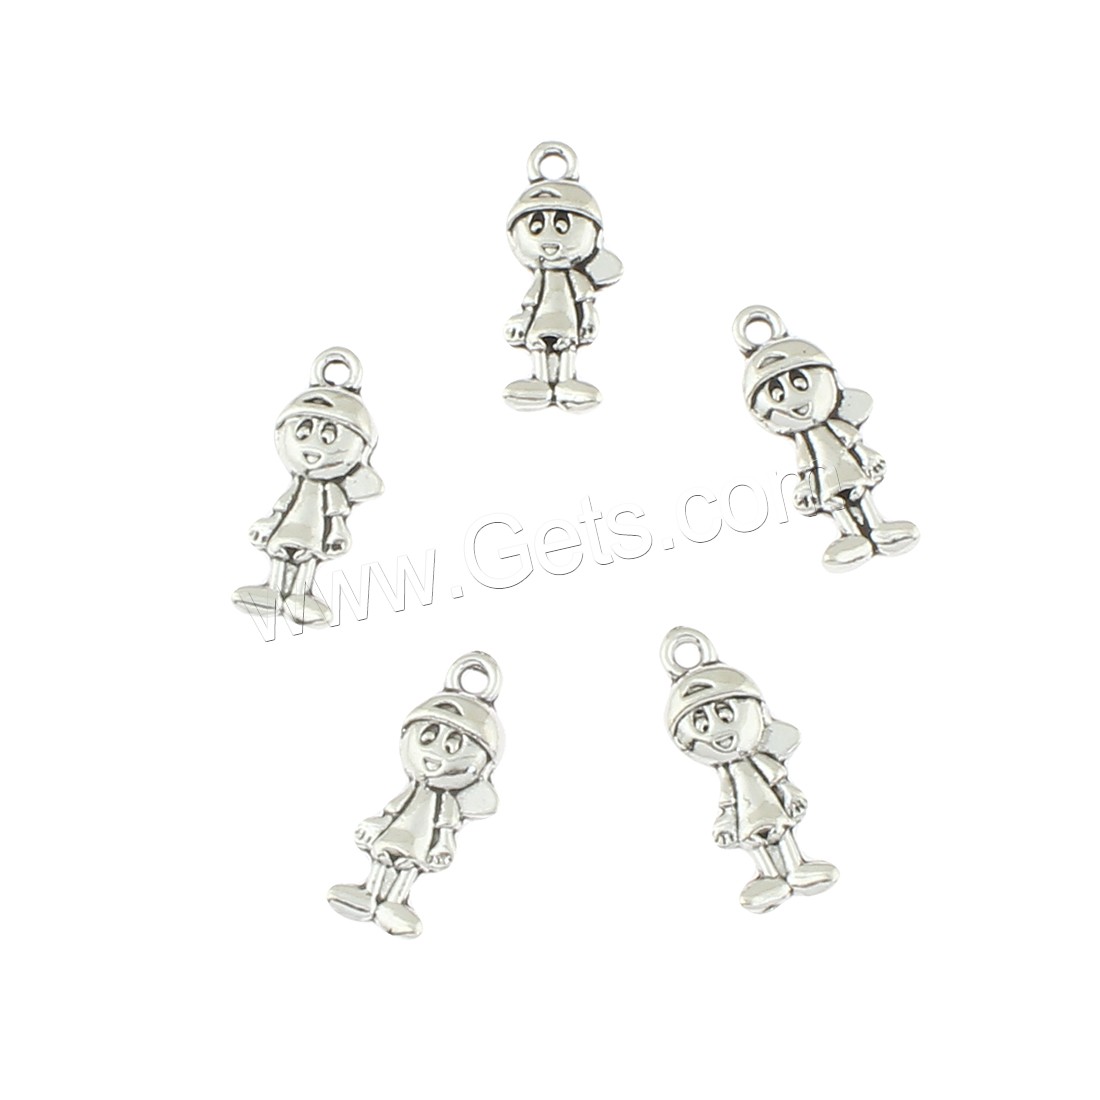 Zinc Alloy Jewelry Pendants, Girl, antique silver color plated, 8x19x3mm, Hole:Approx 1mm, Approx 500PCs/Bag, Sold By Bag